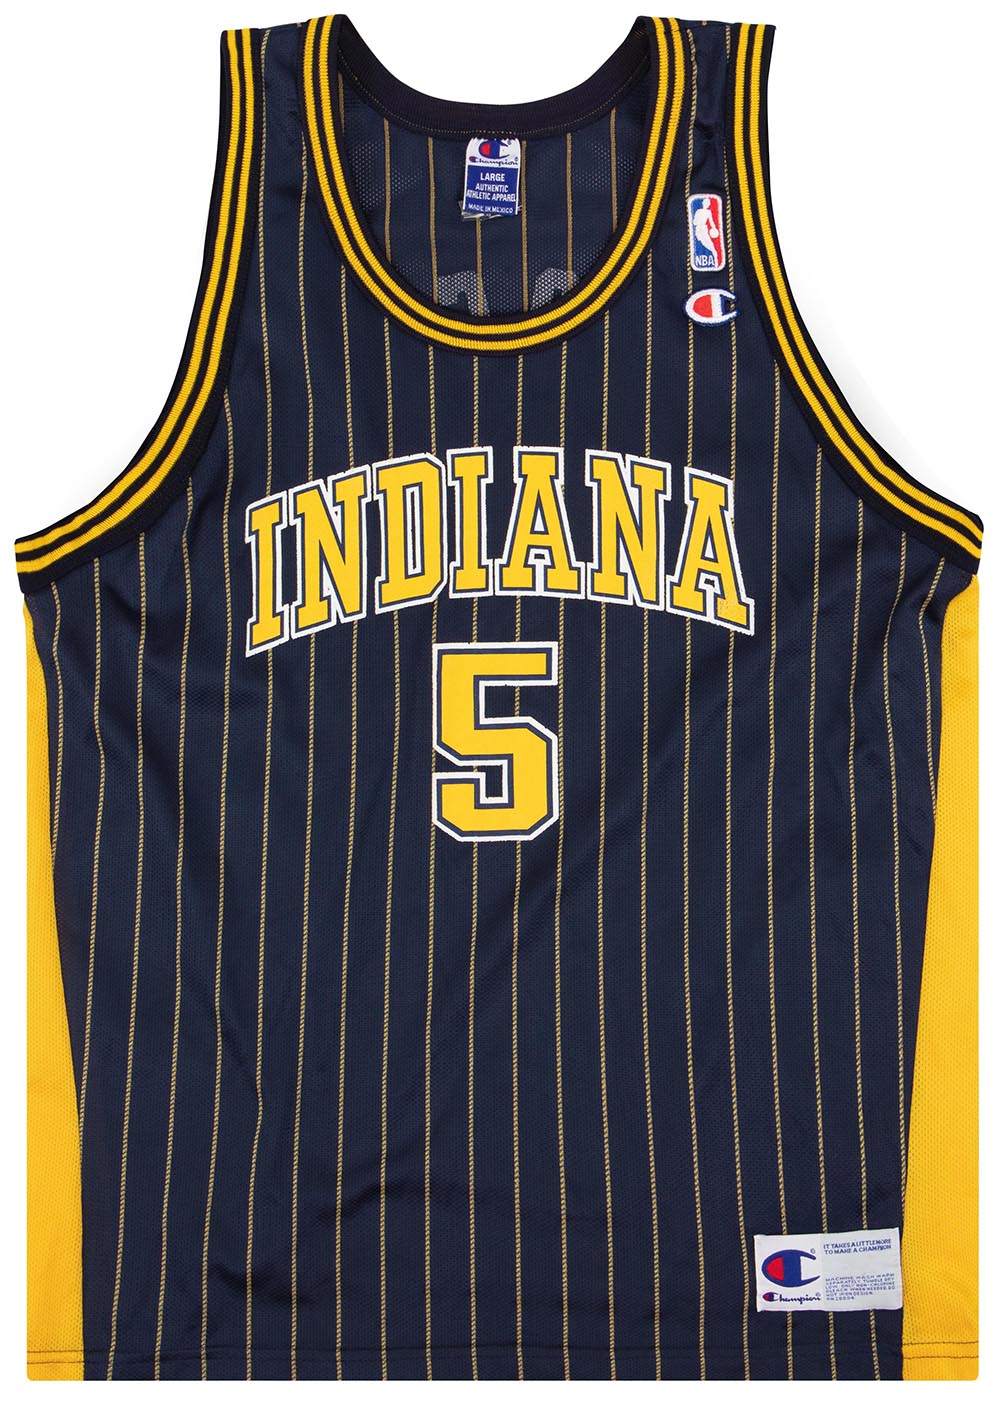 Indiana Pacers Youth Reversible Basketball Jerseys - A105LY-PACERS